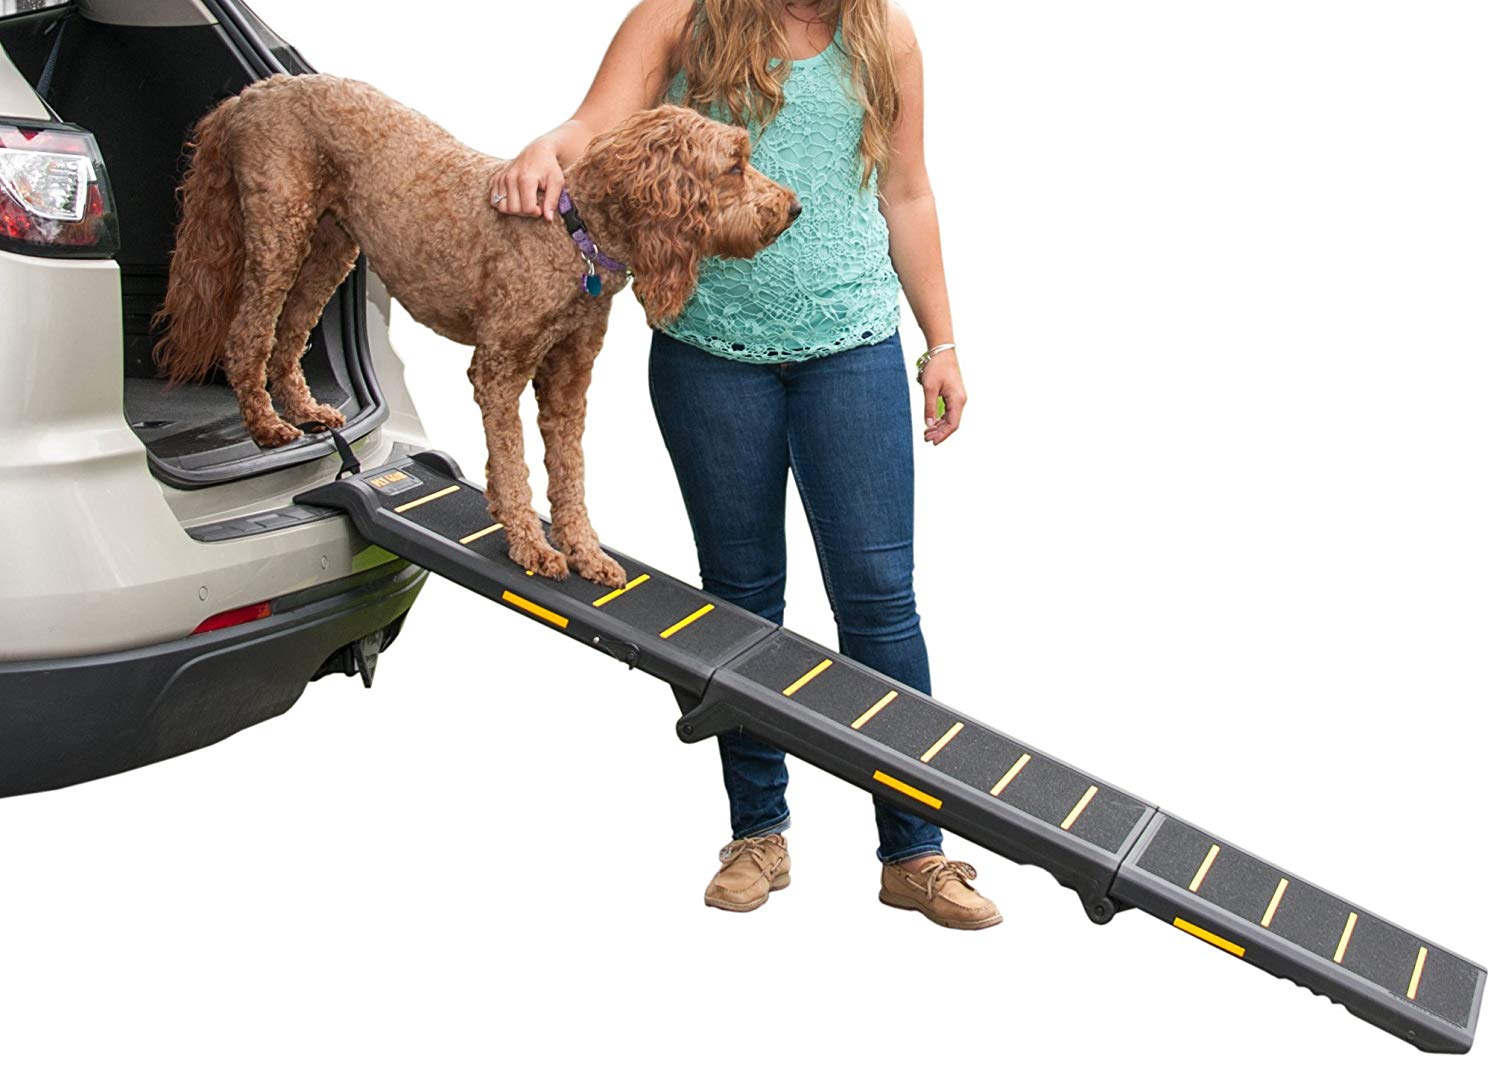 Pet Gear Tri-Fold Ramp, Supports up to 200lbs, 71 in. Long, Patented Compact Easy-Fold Design, Two Models to Choose from, Safety Tether Included